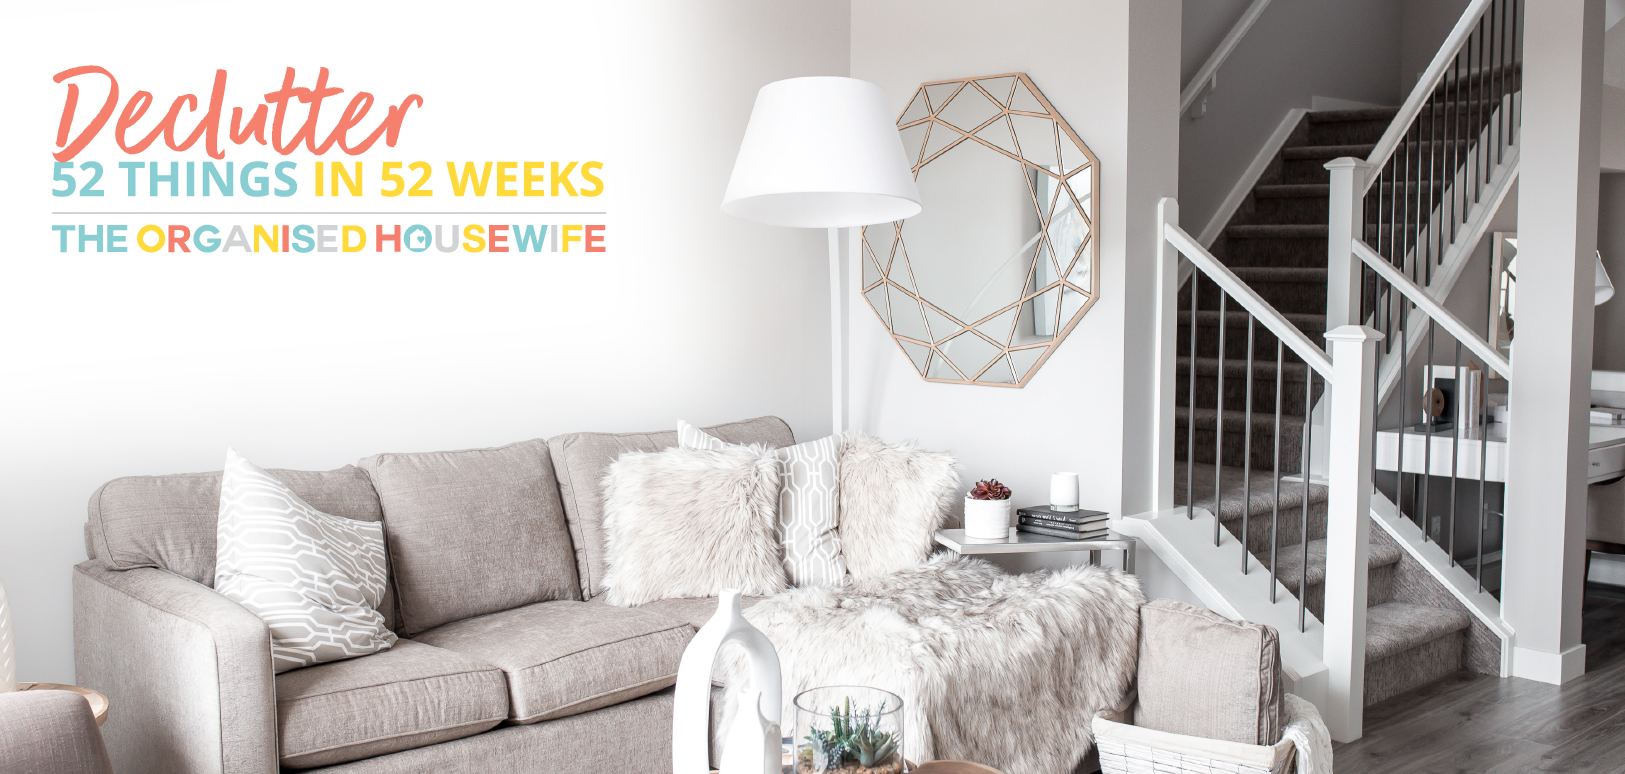 Declutter 52 Things in 52 Weeks with The Organised Housewife